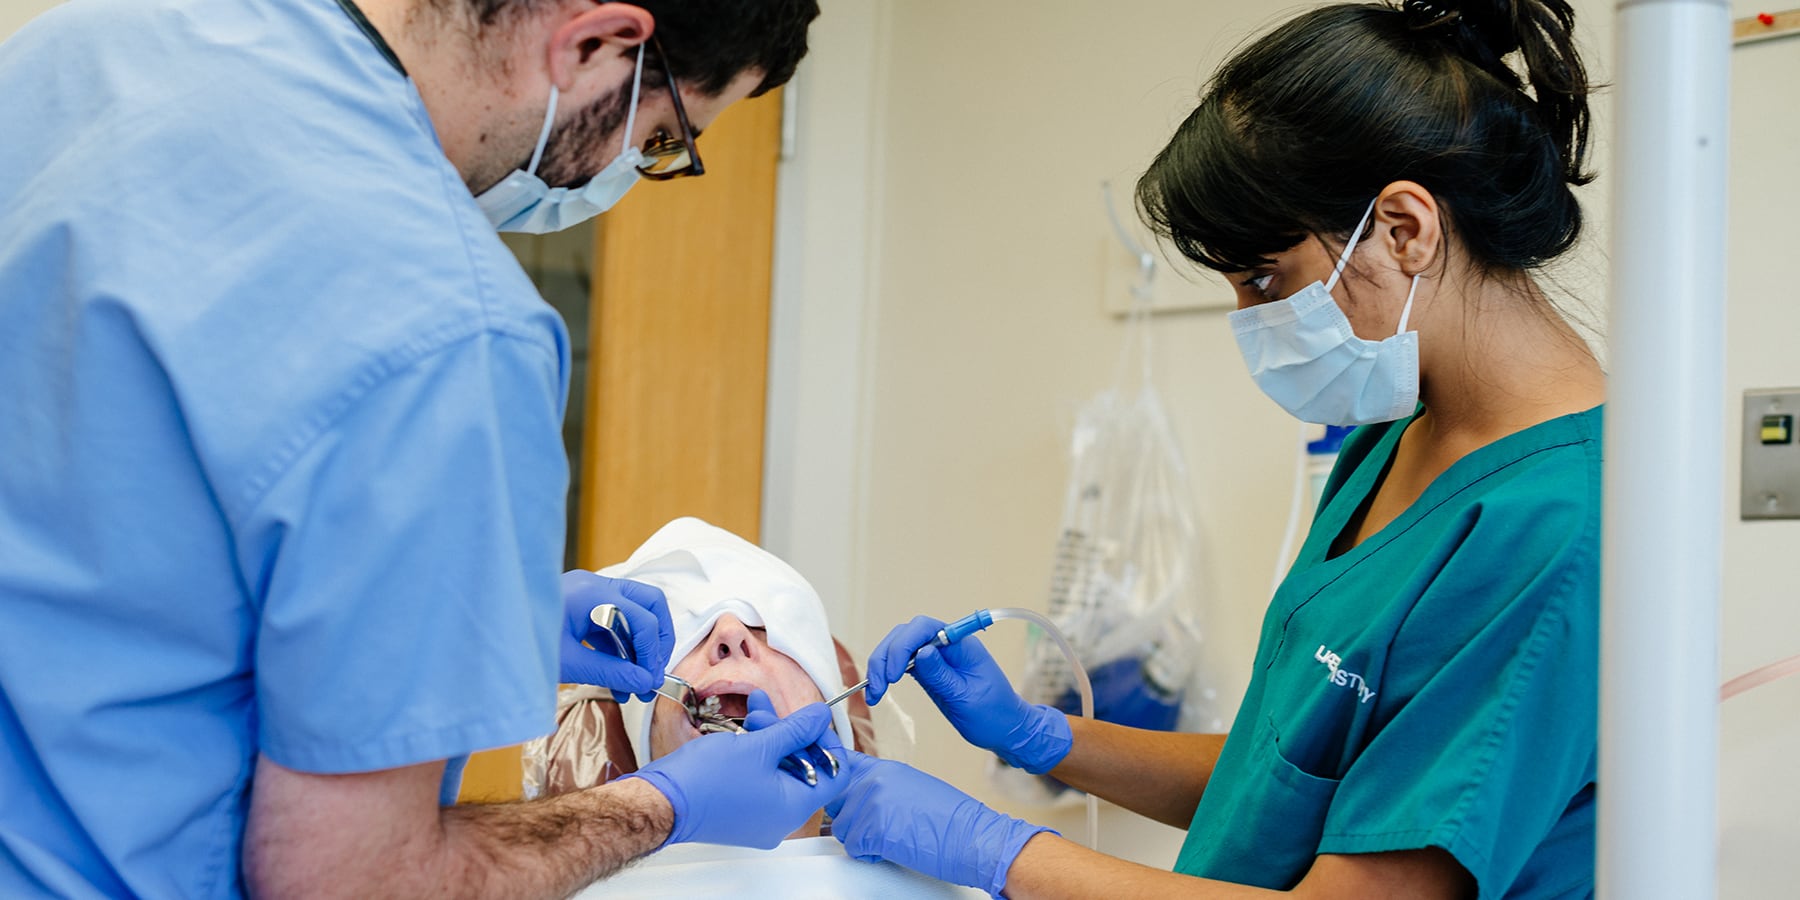 Two dentists examining the mouth of a patient.